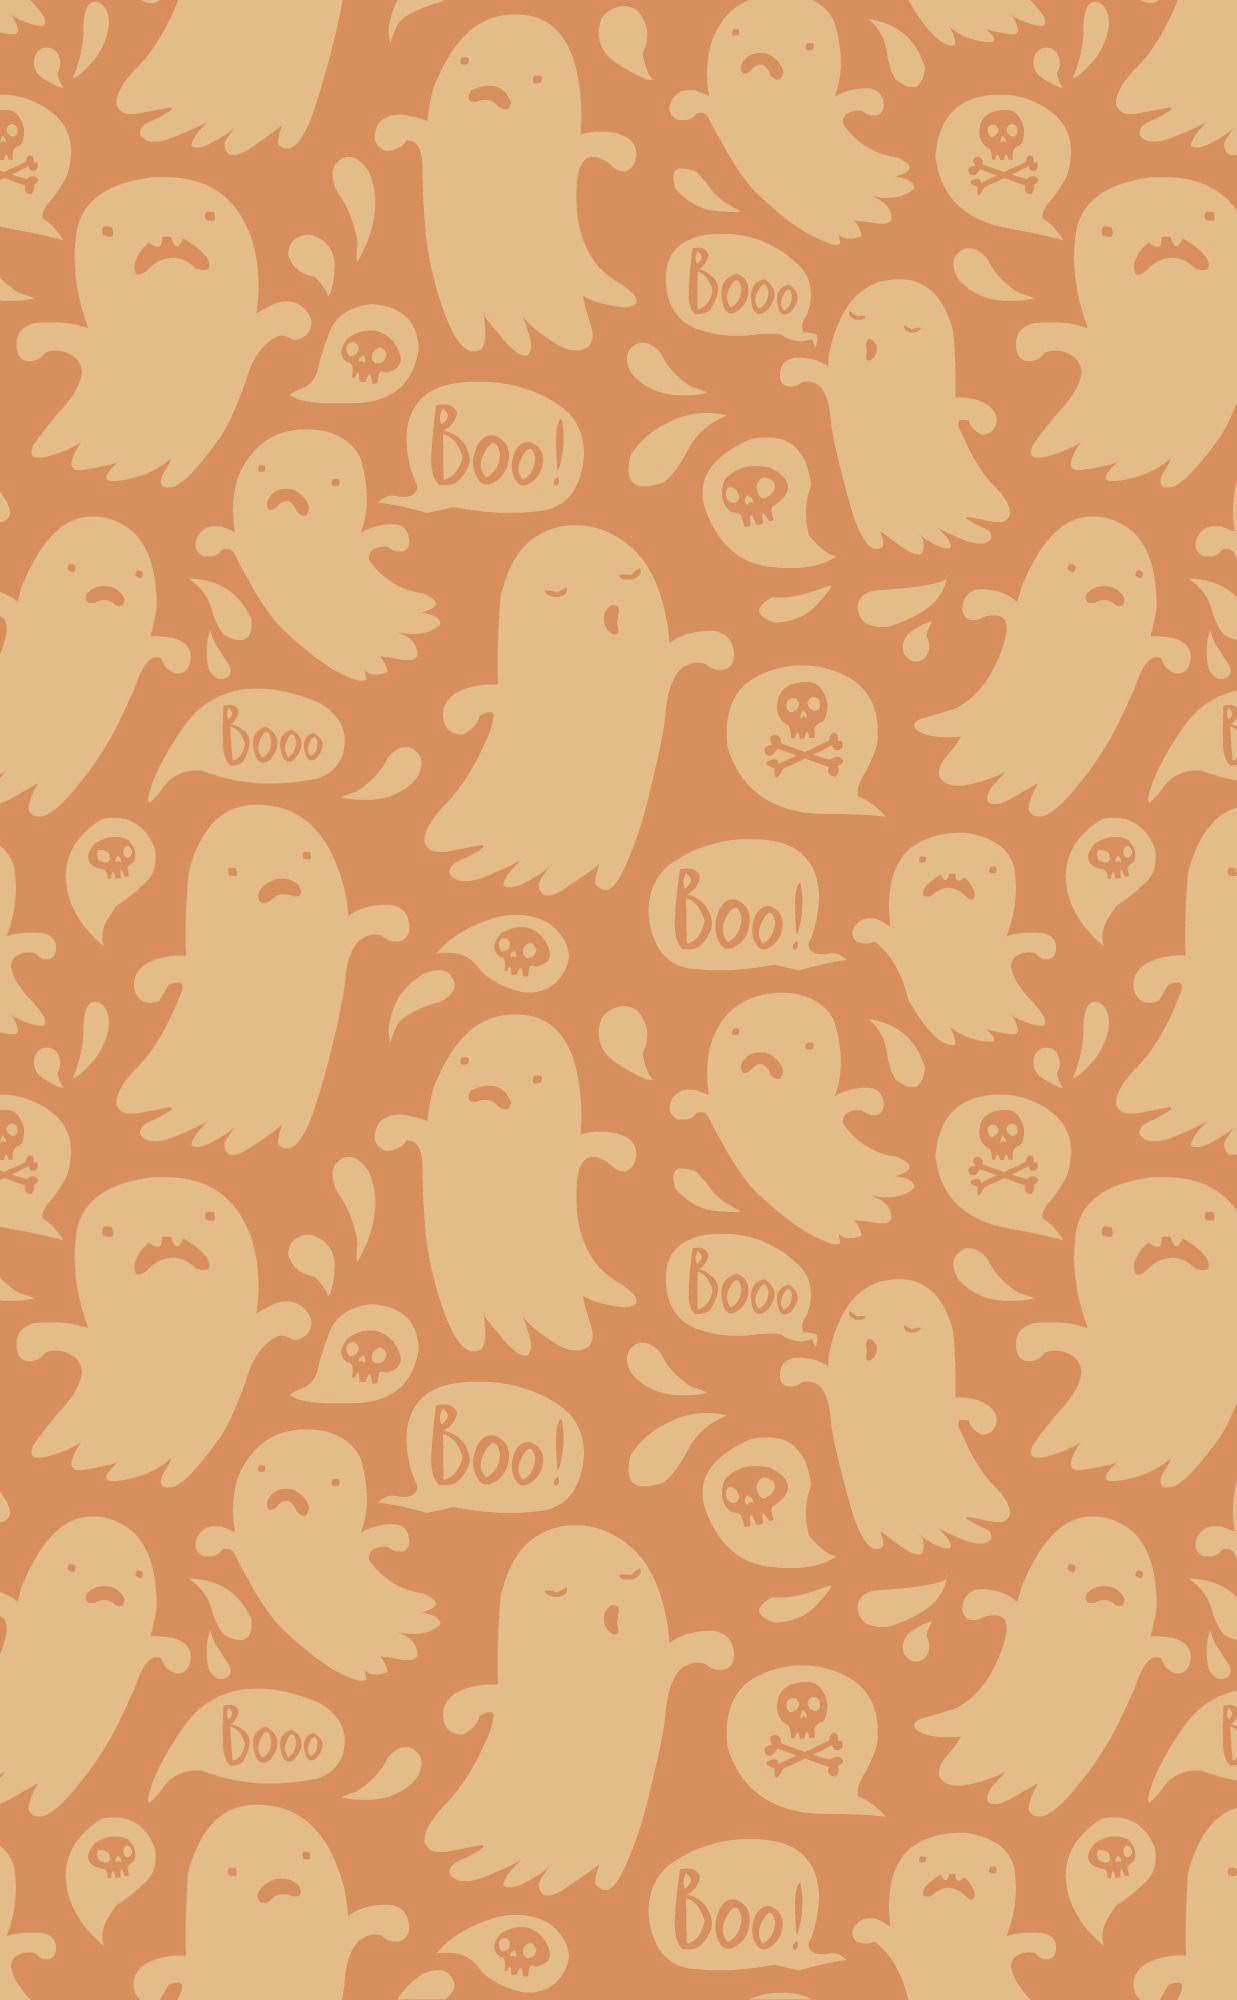 Adorable halloween mobile wallpapers to download